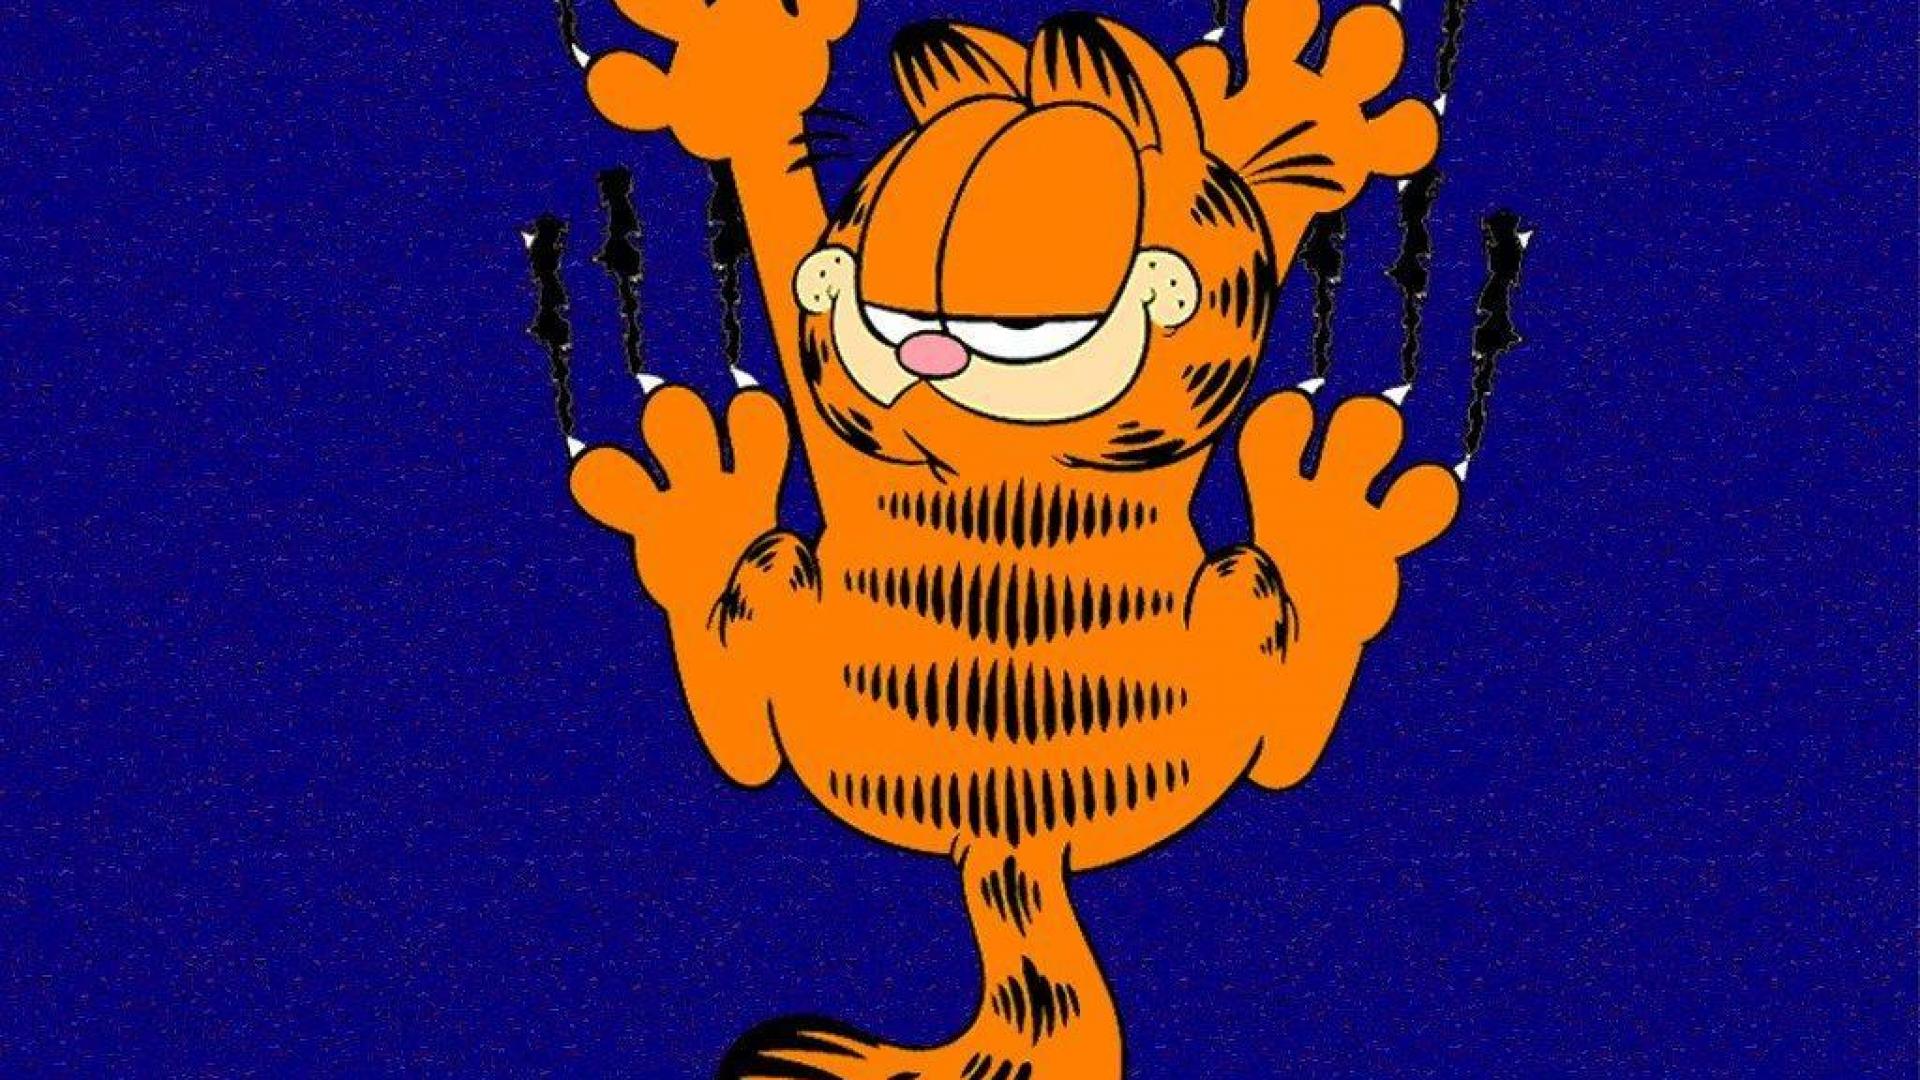 check out these garfield wallpapers i made  rgarfield